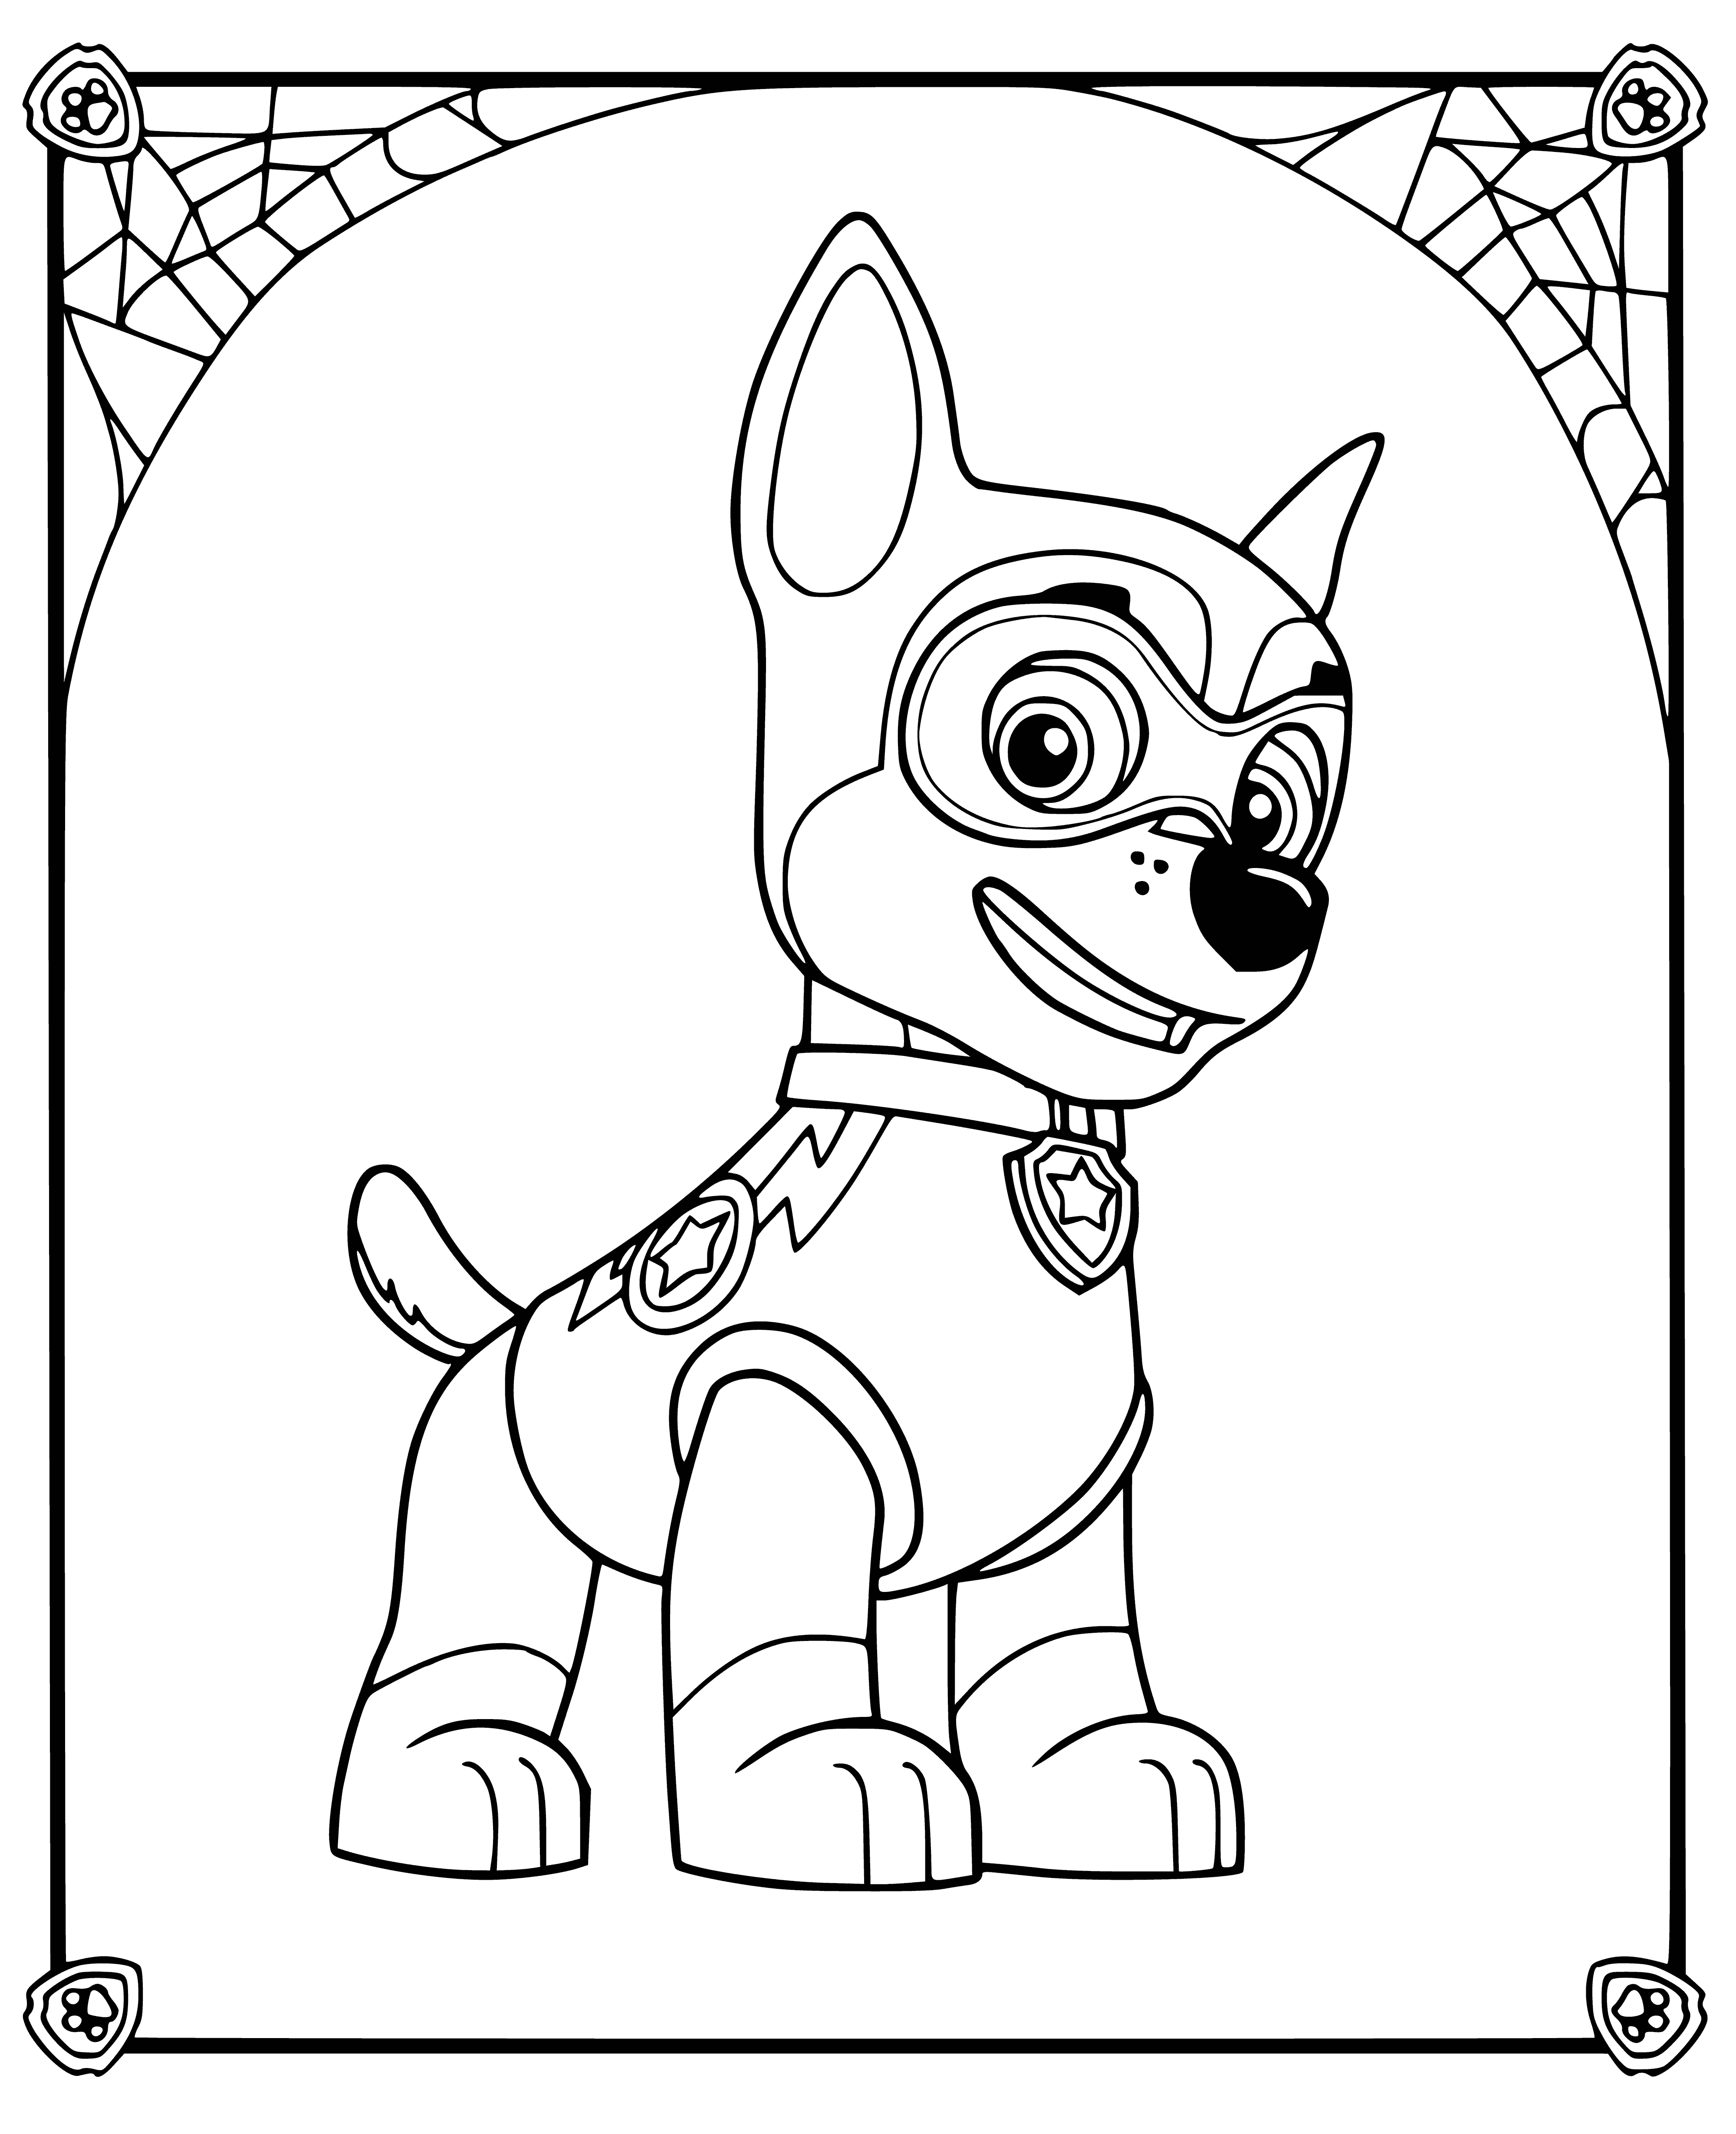 coloring page: The PAW Patrol Racer Lightning is a blue & white race car toy w/ the PAW Patrol logo. Perfect for little speedsters! #PAWPatrol